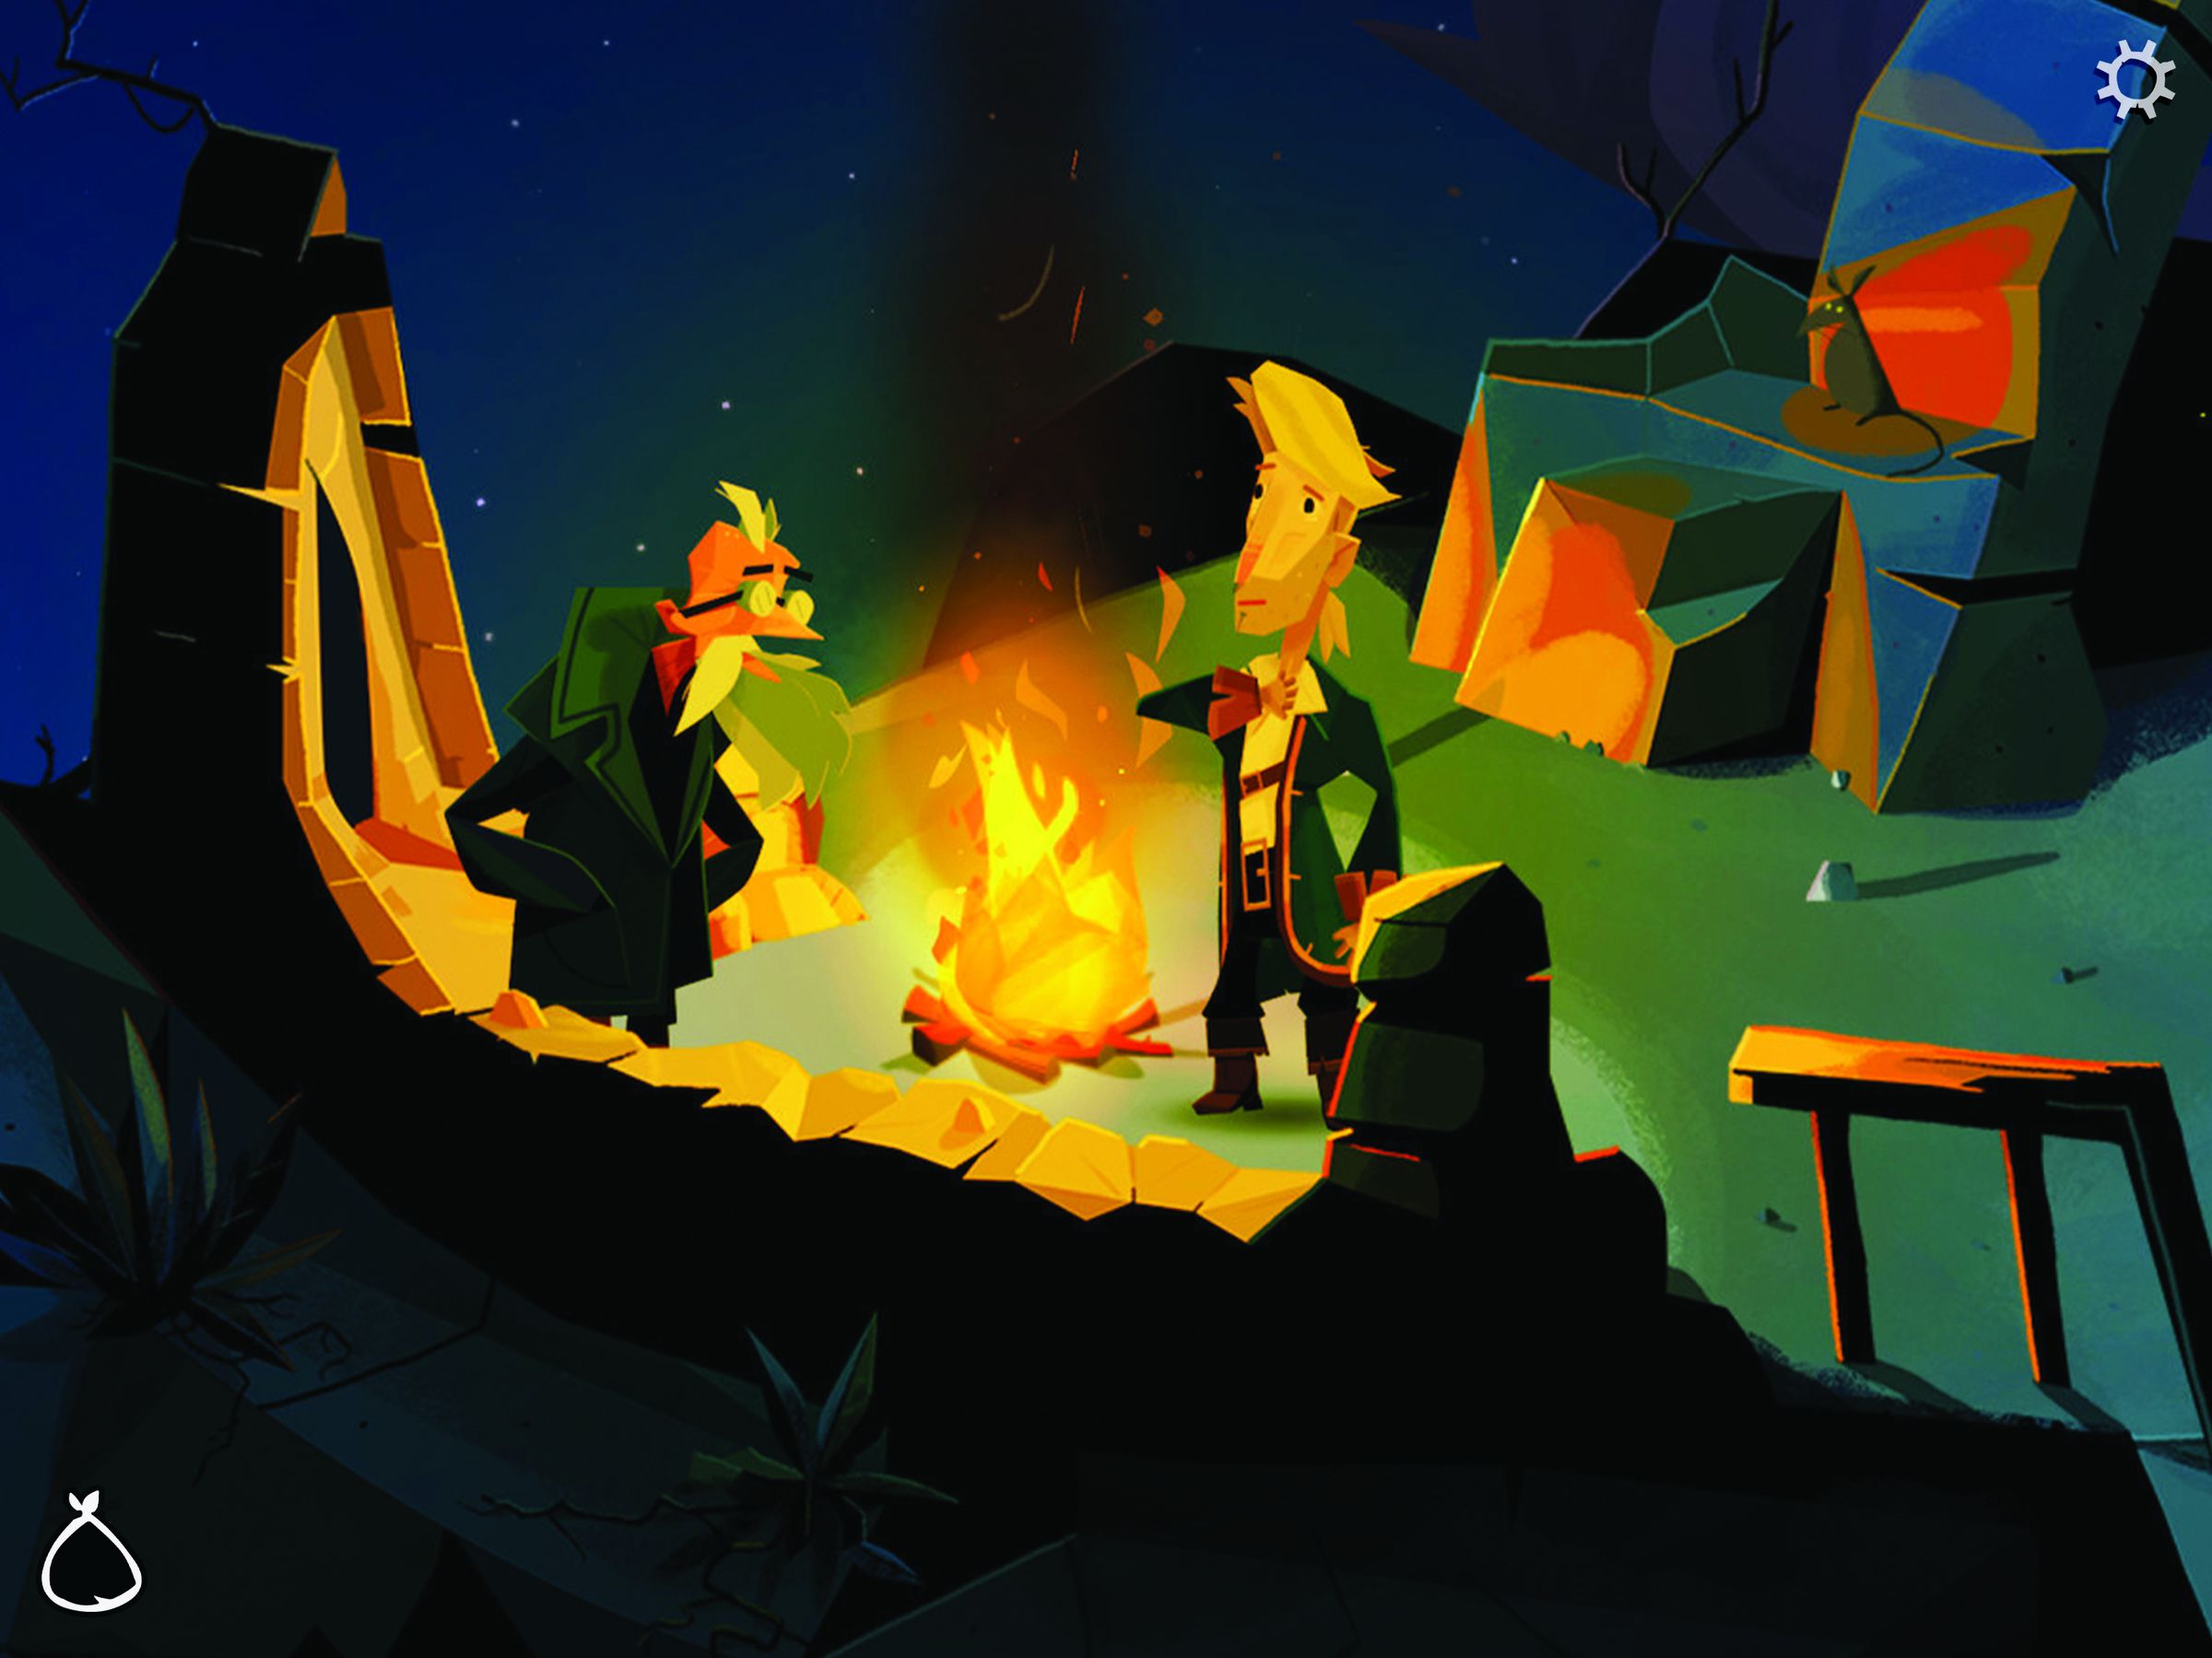 A screenshot from the iOS version of Return to Monkey Island.